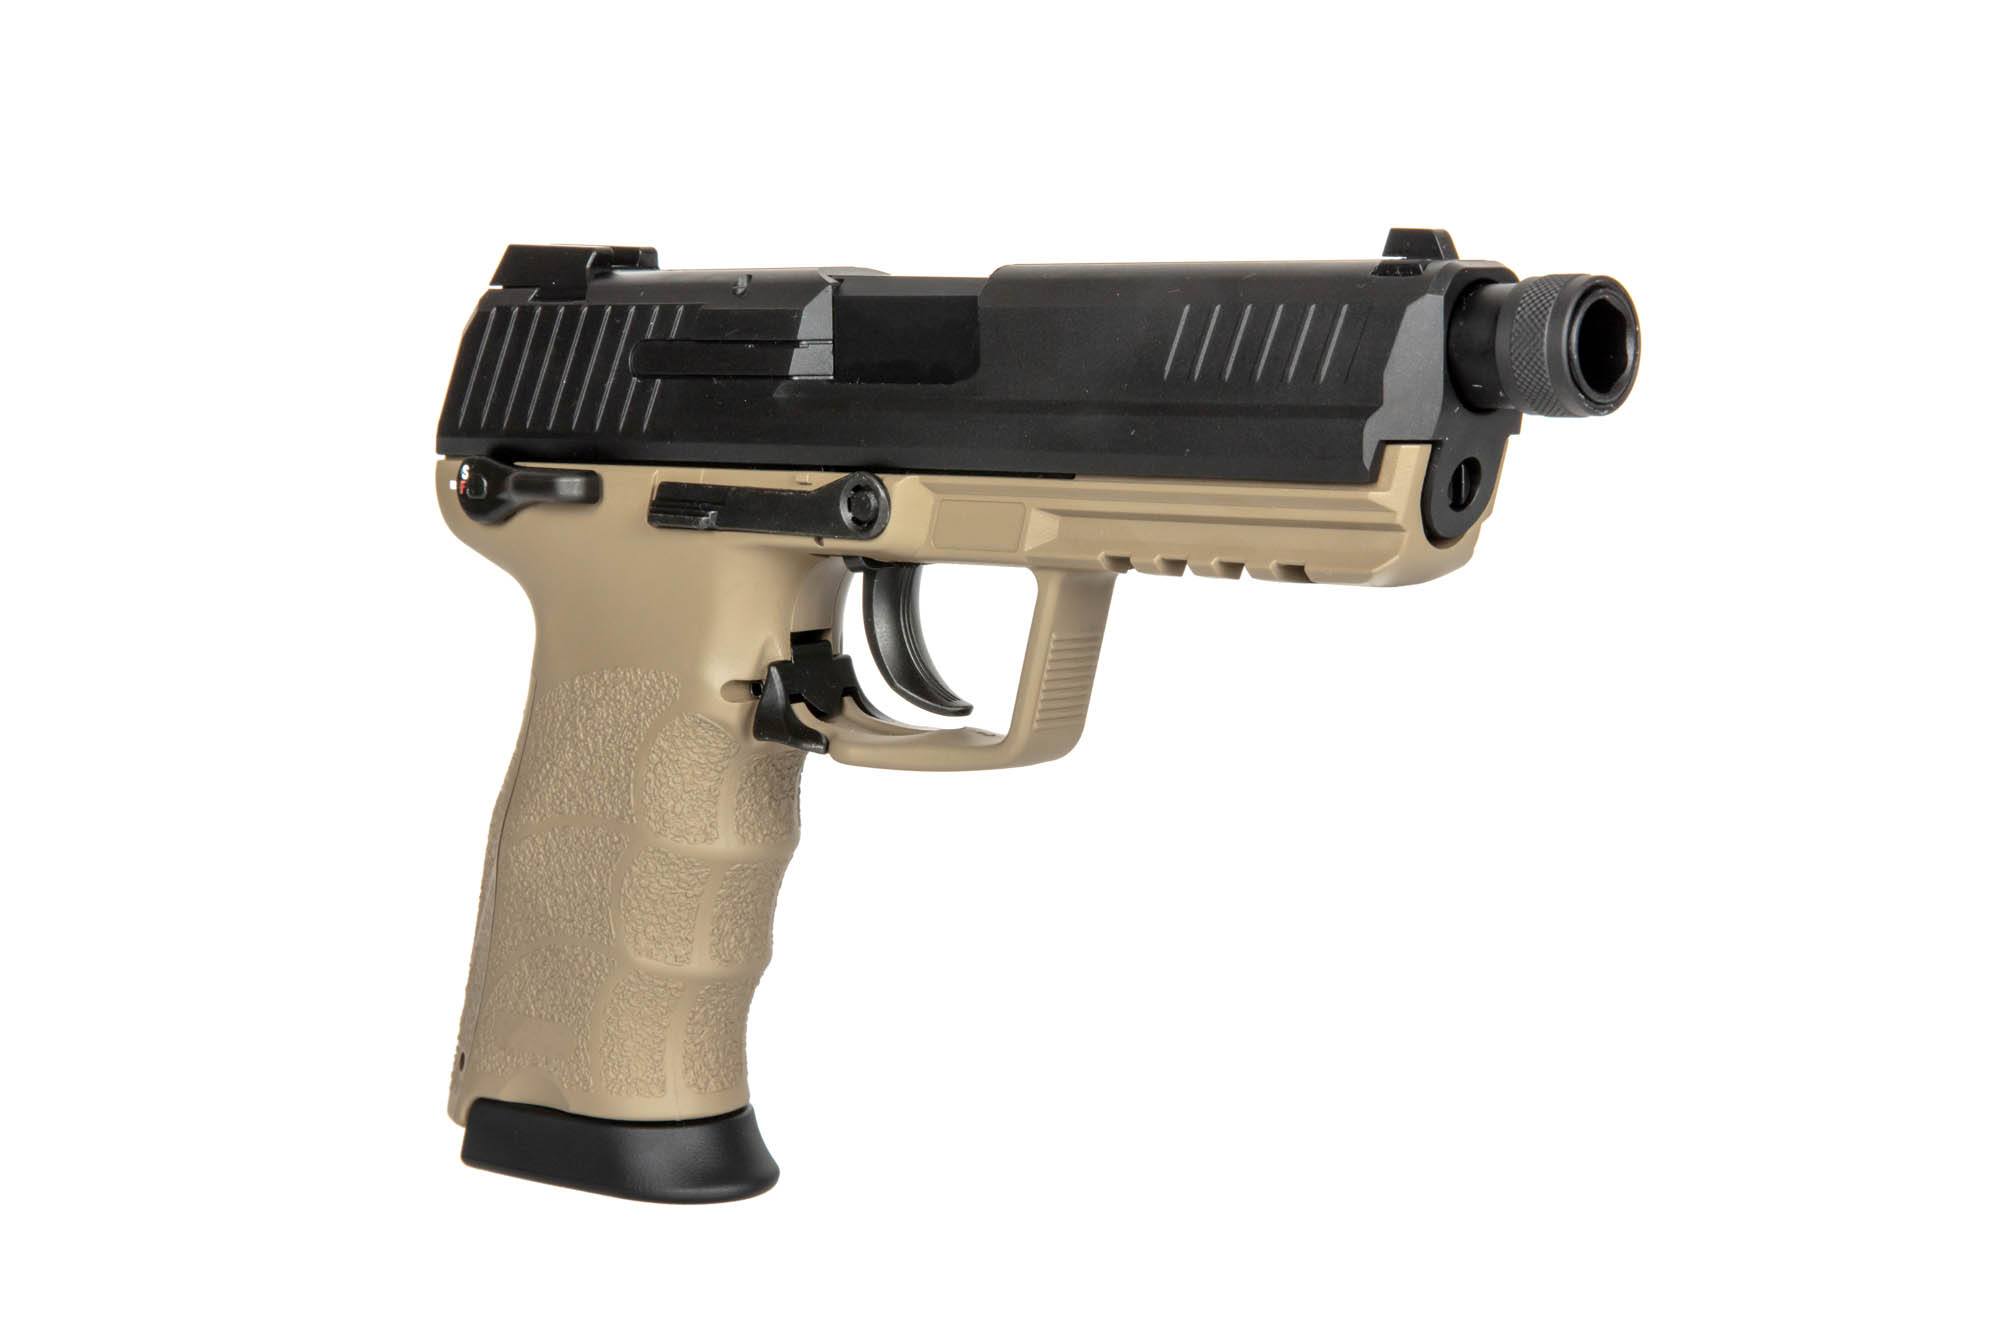 TM45 Tactical Pistol with Silencer Replica - Tan by Tokyo Marui on Airsoft Mania Europe